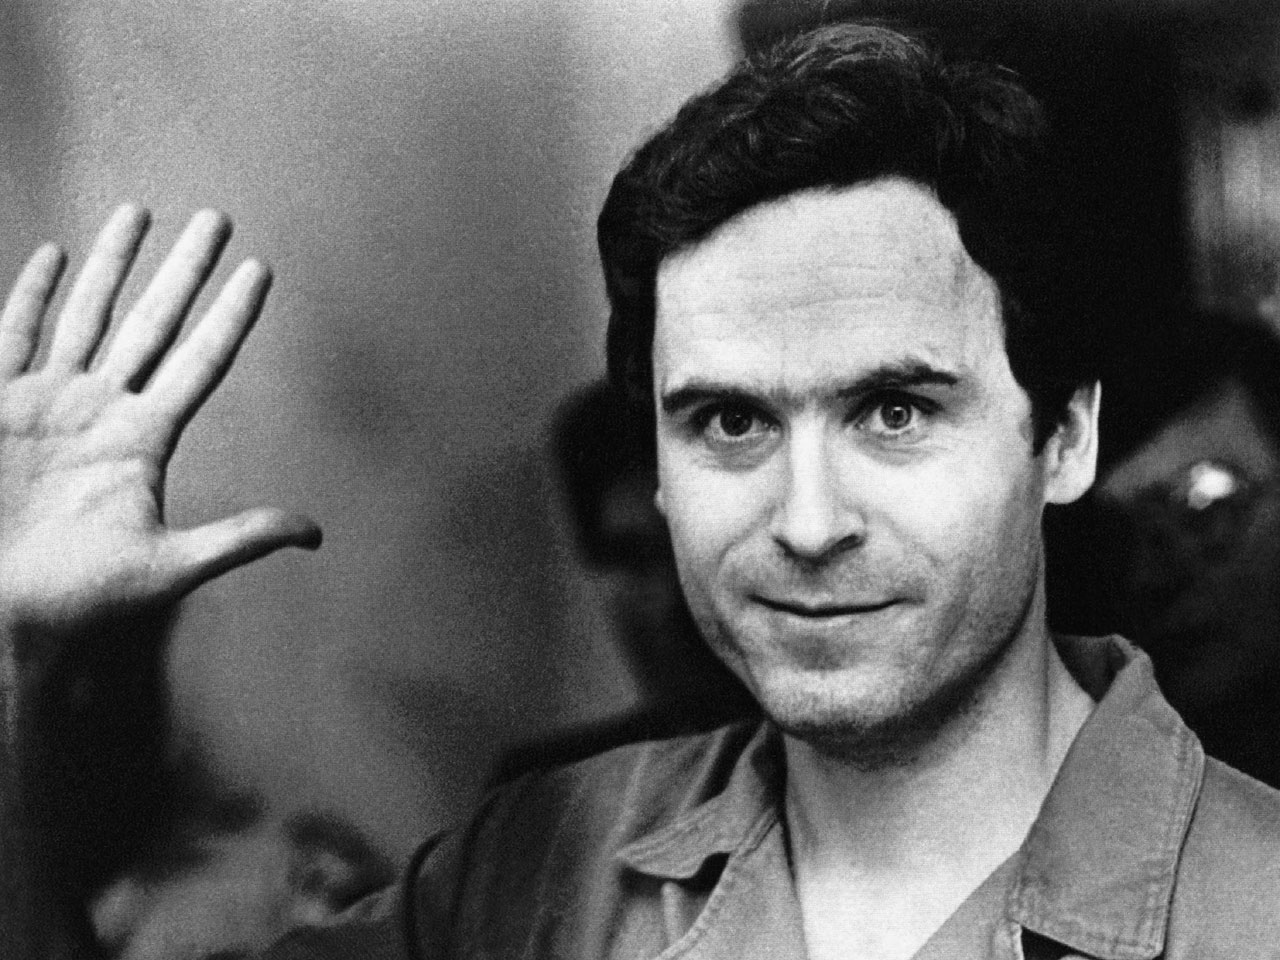 7. Ted Bundy
This brutal killer kidnapped his victims, raped them and then killed them by different ways. He accepted 30 murders. He was given the punishment of ‘death by electric shocks’.